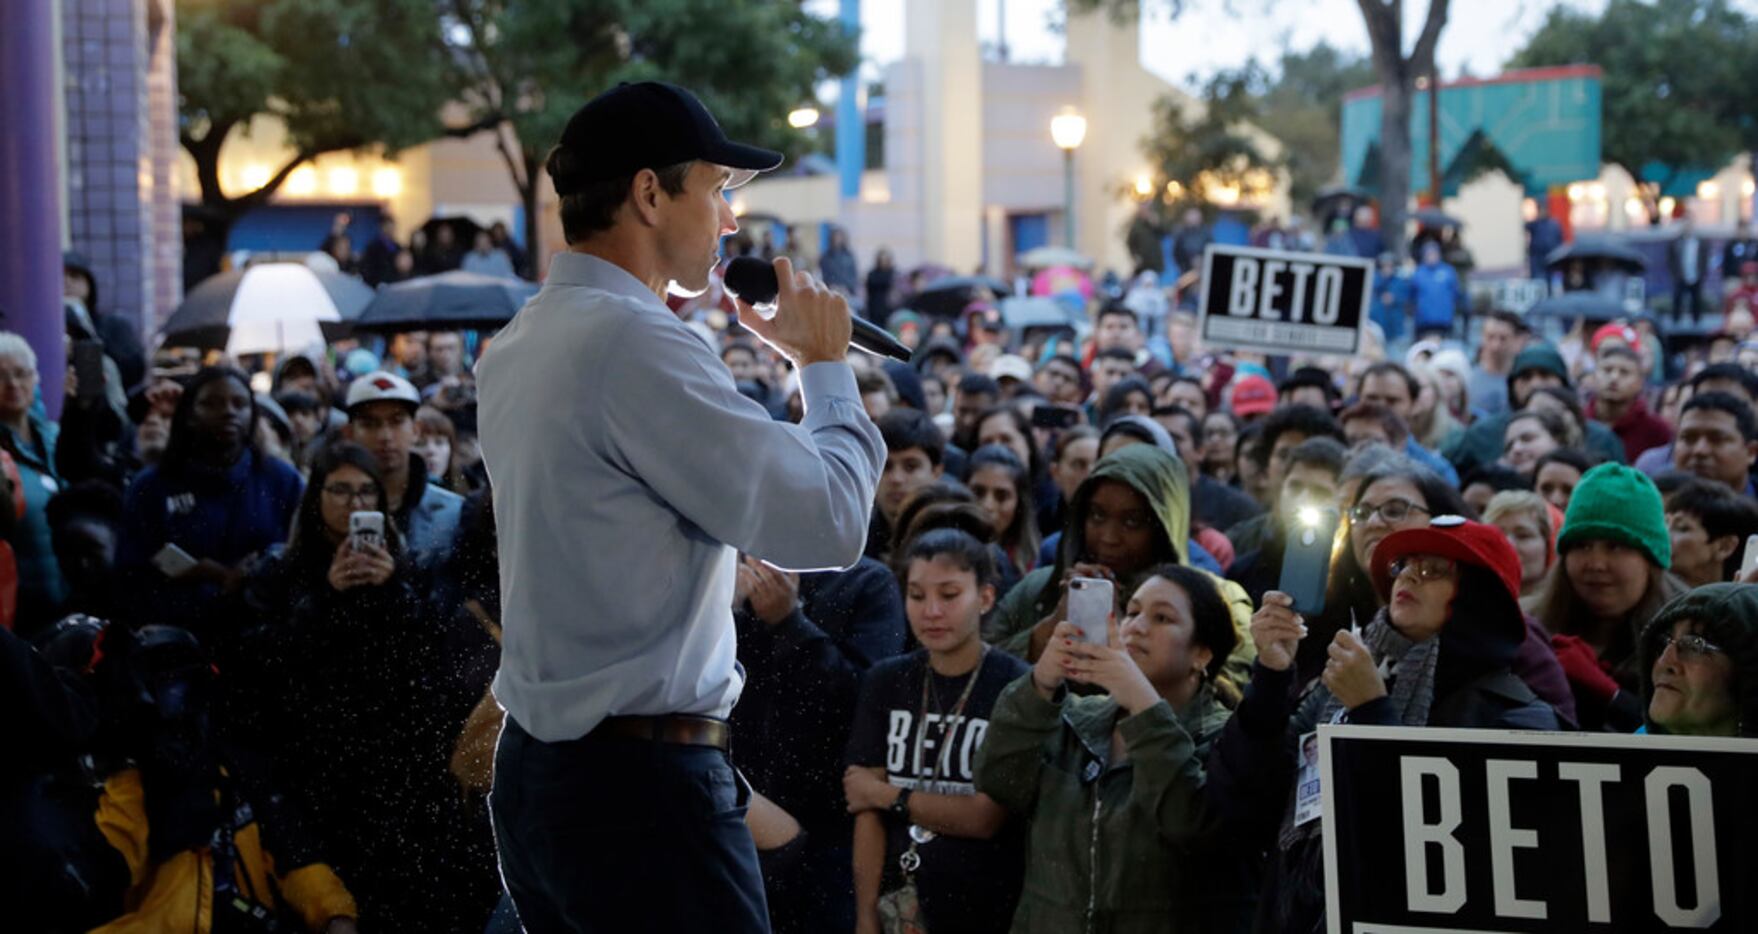 Democratic U.S. Senate candidate Beto O'Rourke speaks at a rally, Monday, Oct. 15, 2018, in...